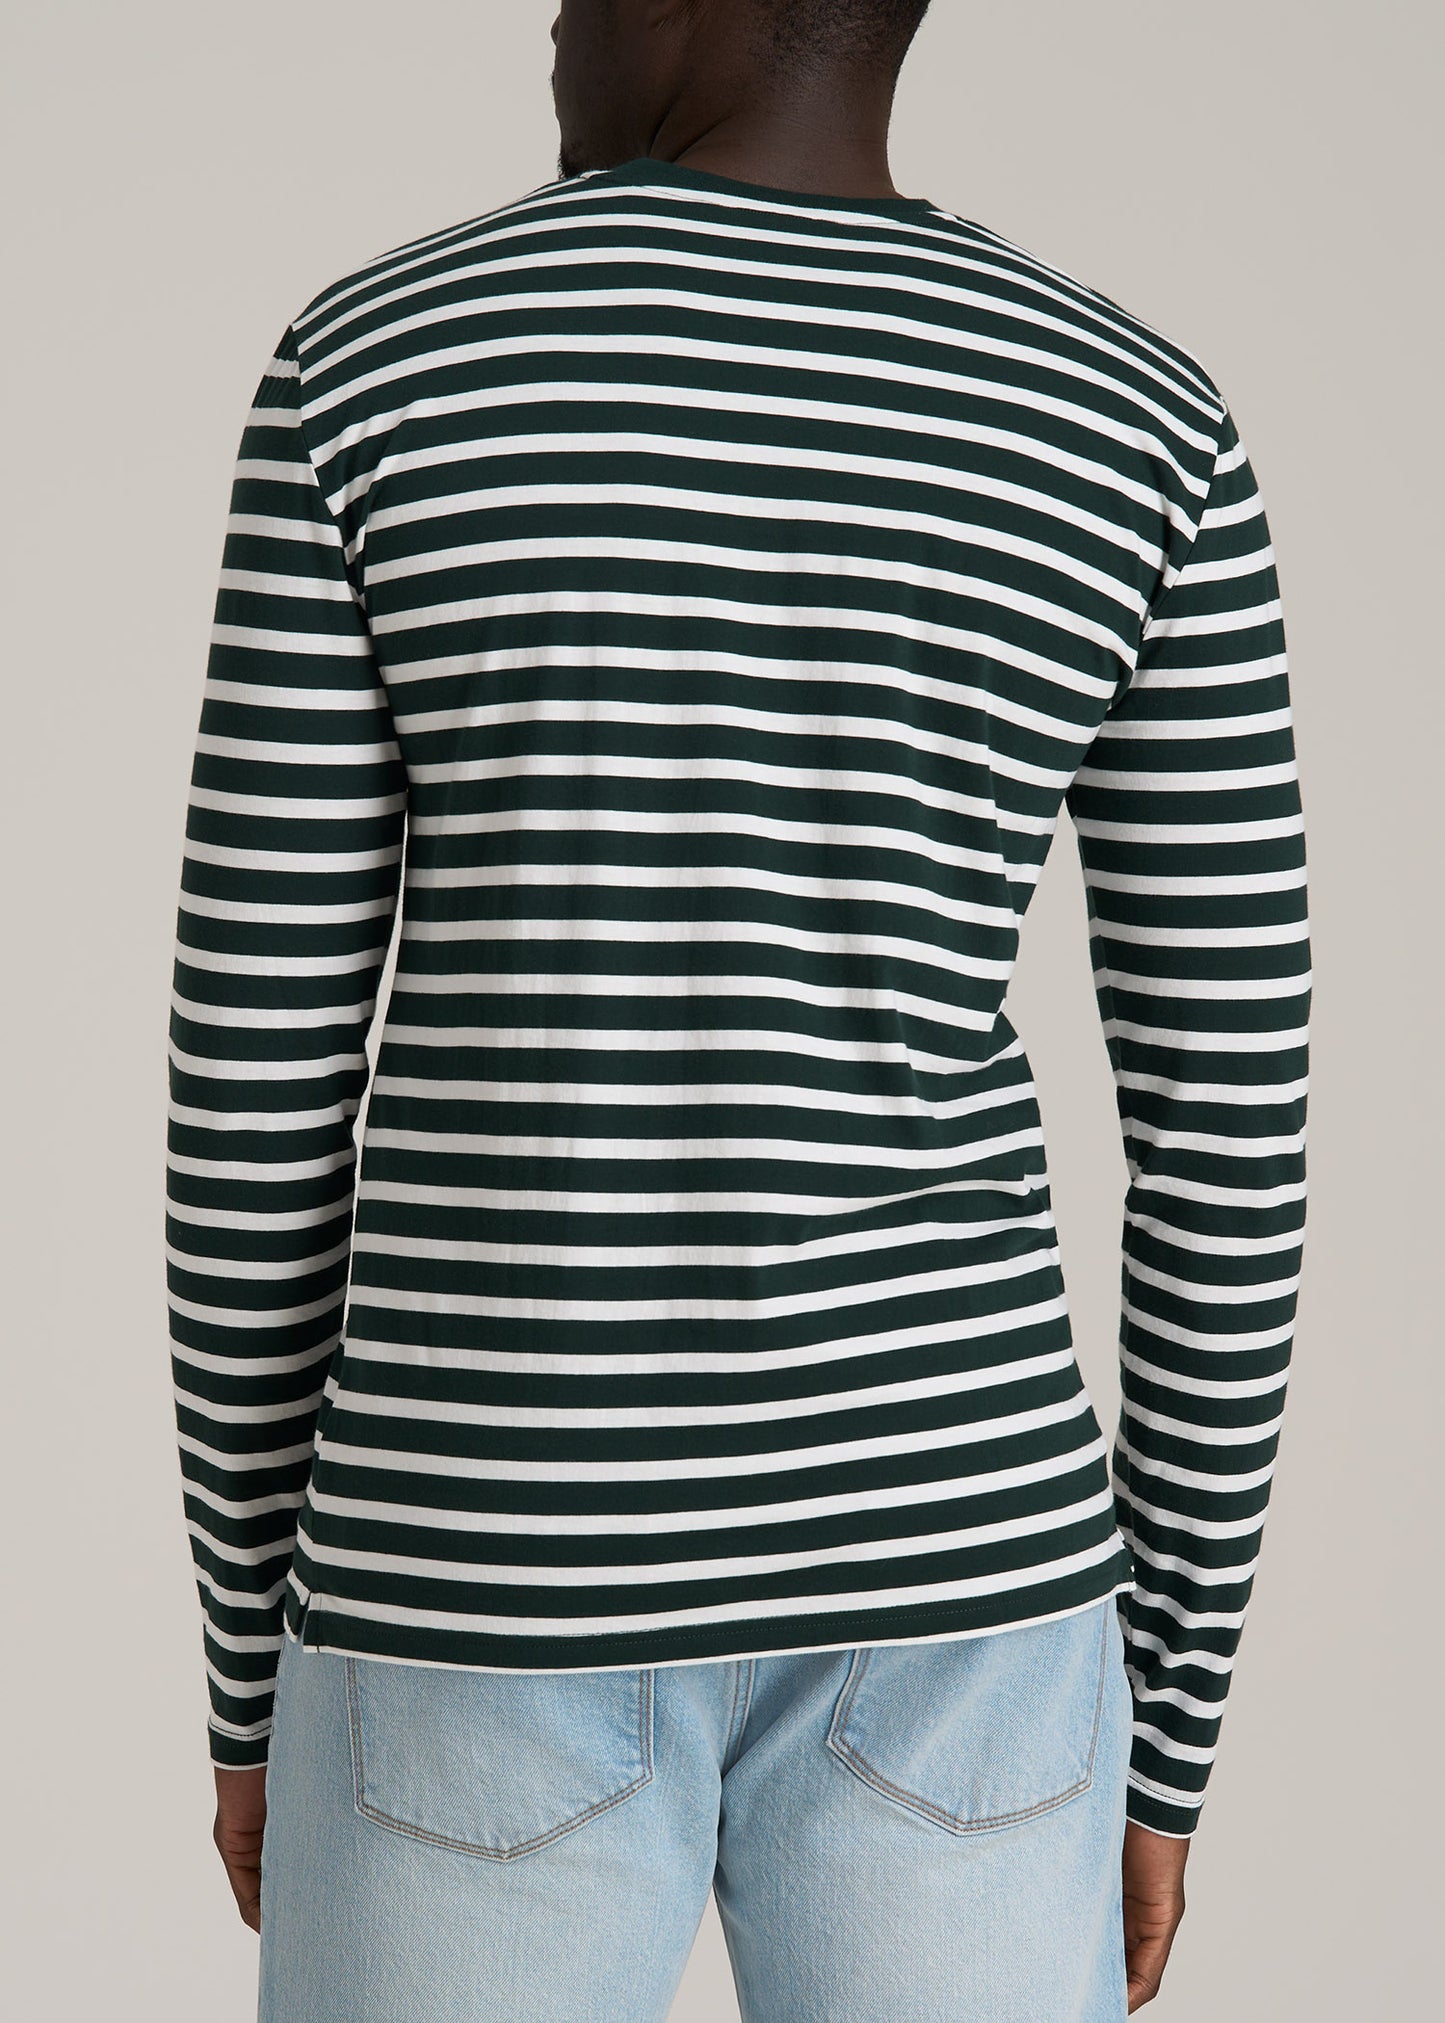 Long Sleeve Striped Tall Men's Tee in Emerald and White Stripe